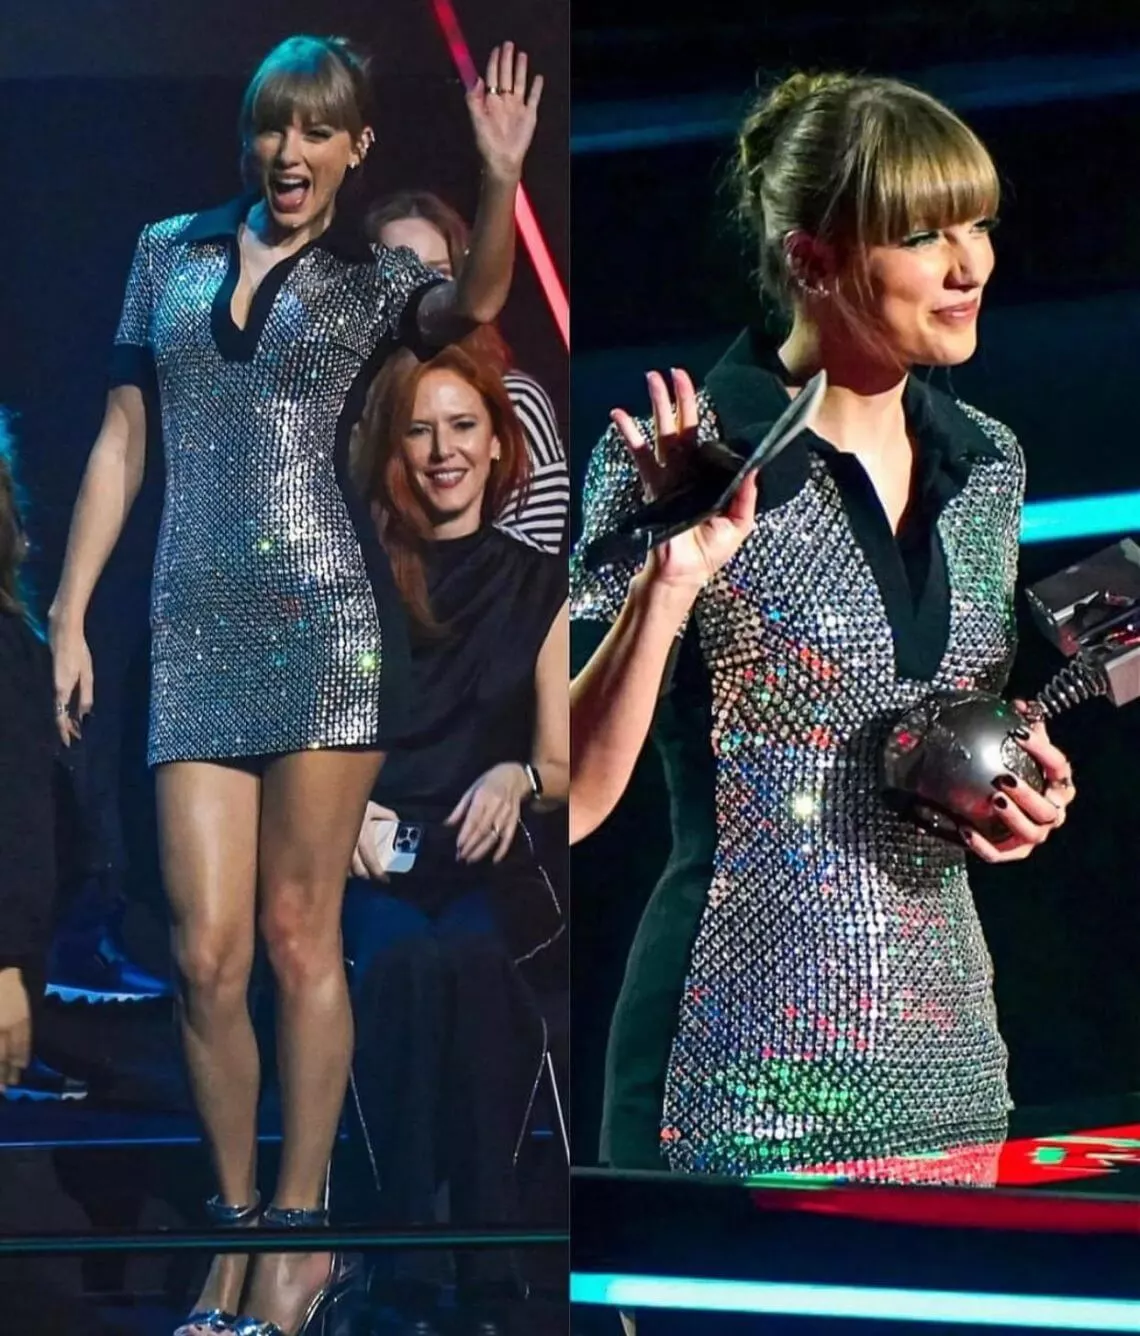 Taylor Swift appeared at the MTV EMA awards